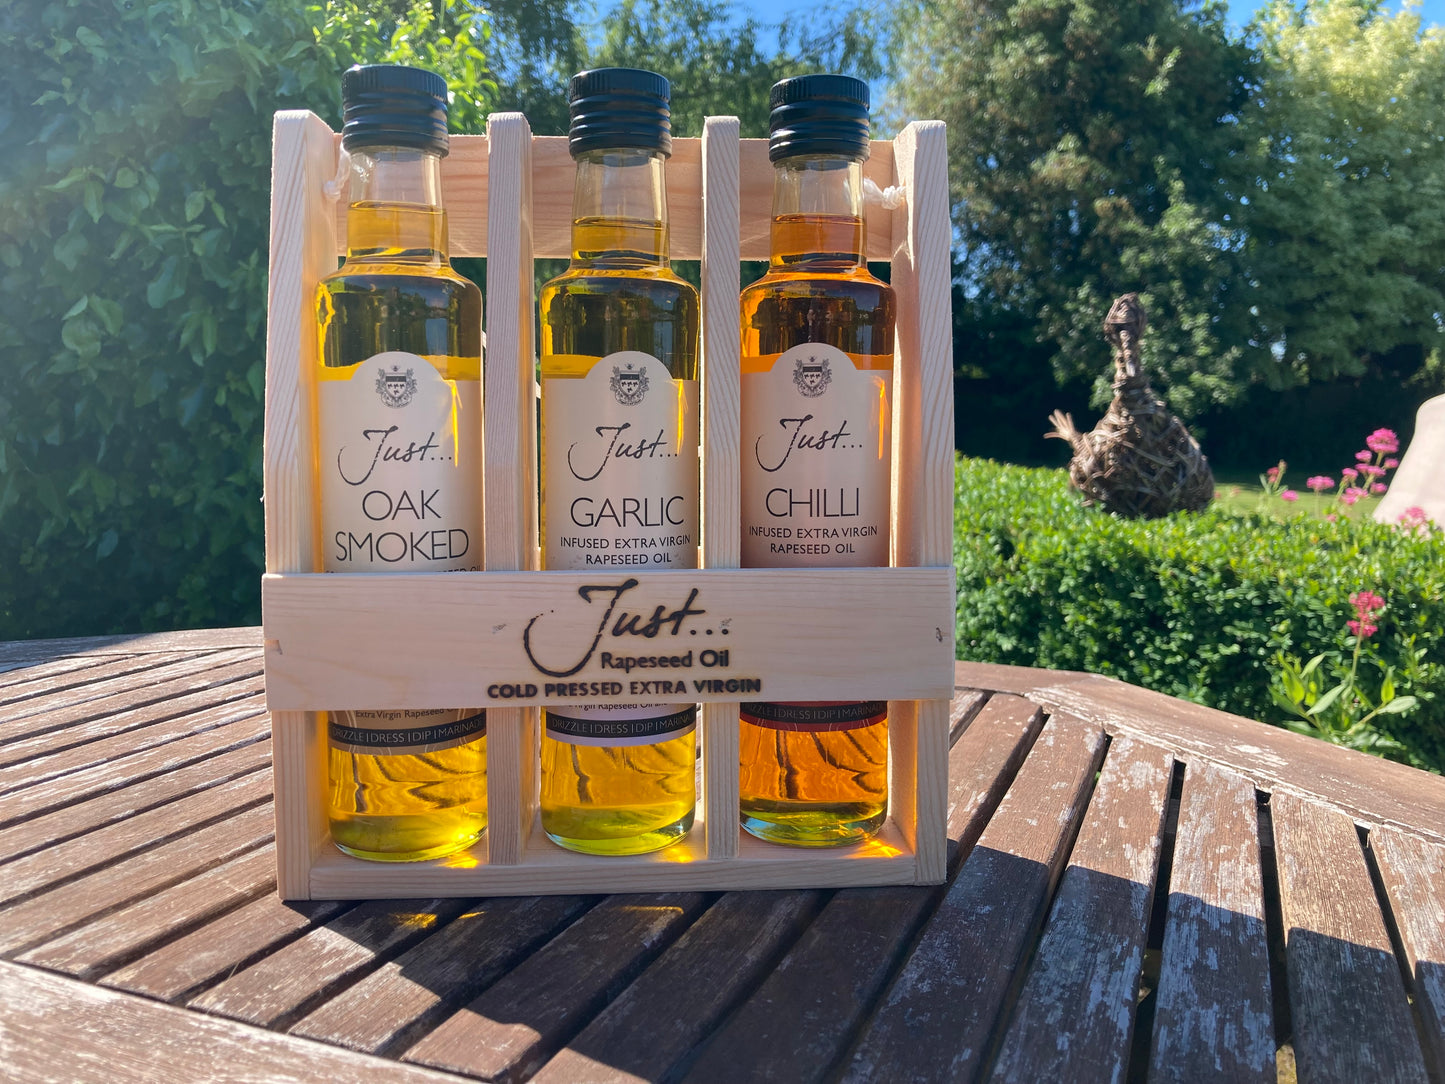 BBQ King Cruet Set - Oak Smoked, Garlic and Chilli Infused Cold Pressed Rapeseed Oil 250ml (Set of 3)